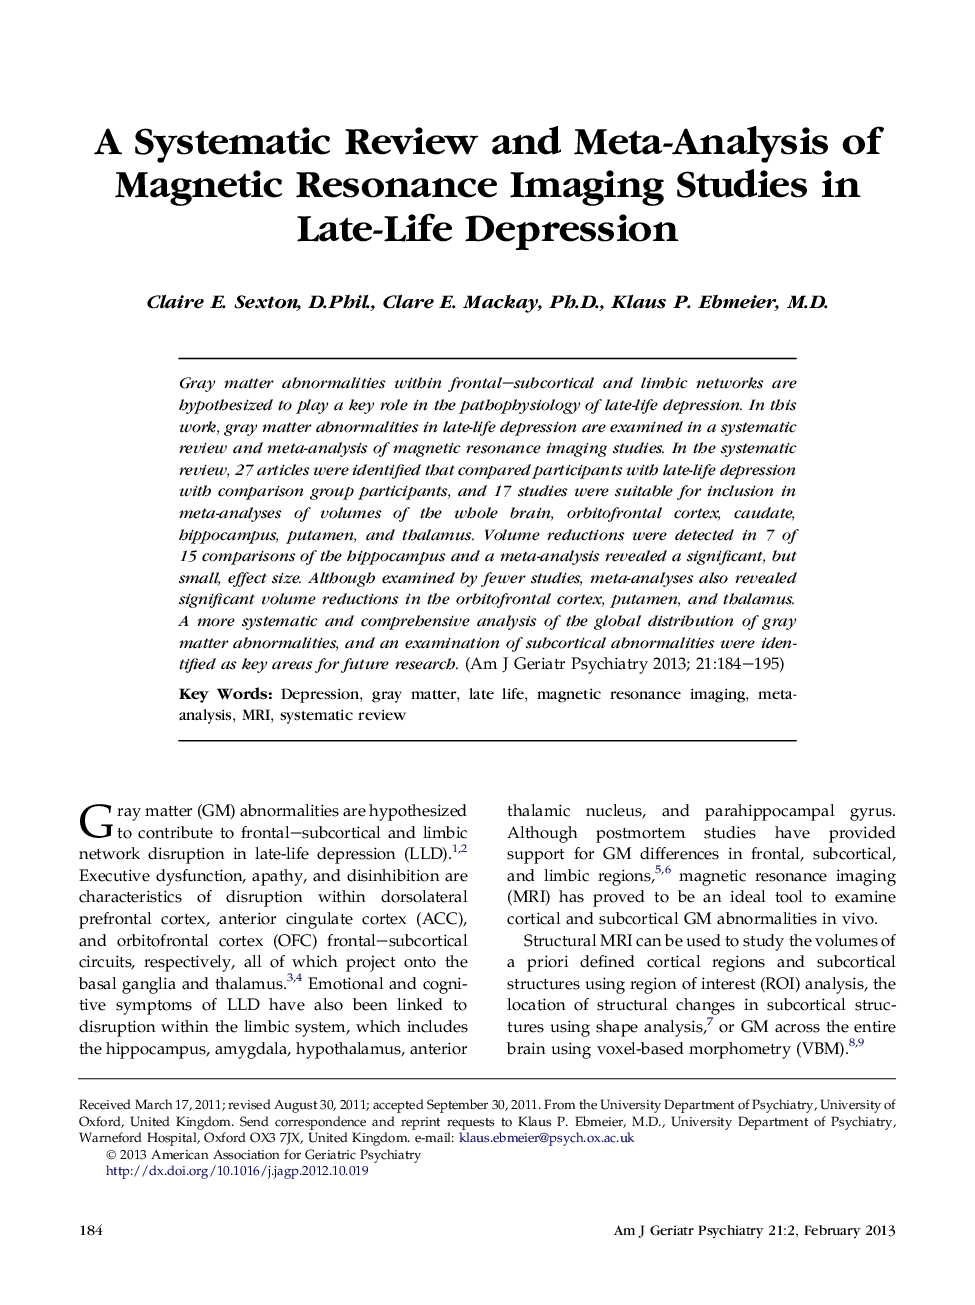 A Systematic Review and Meta-Analysis of Magnetic Resonance Imaging Studies in Late-Life Depression